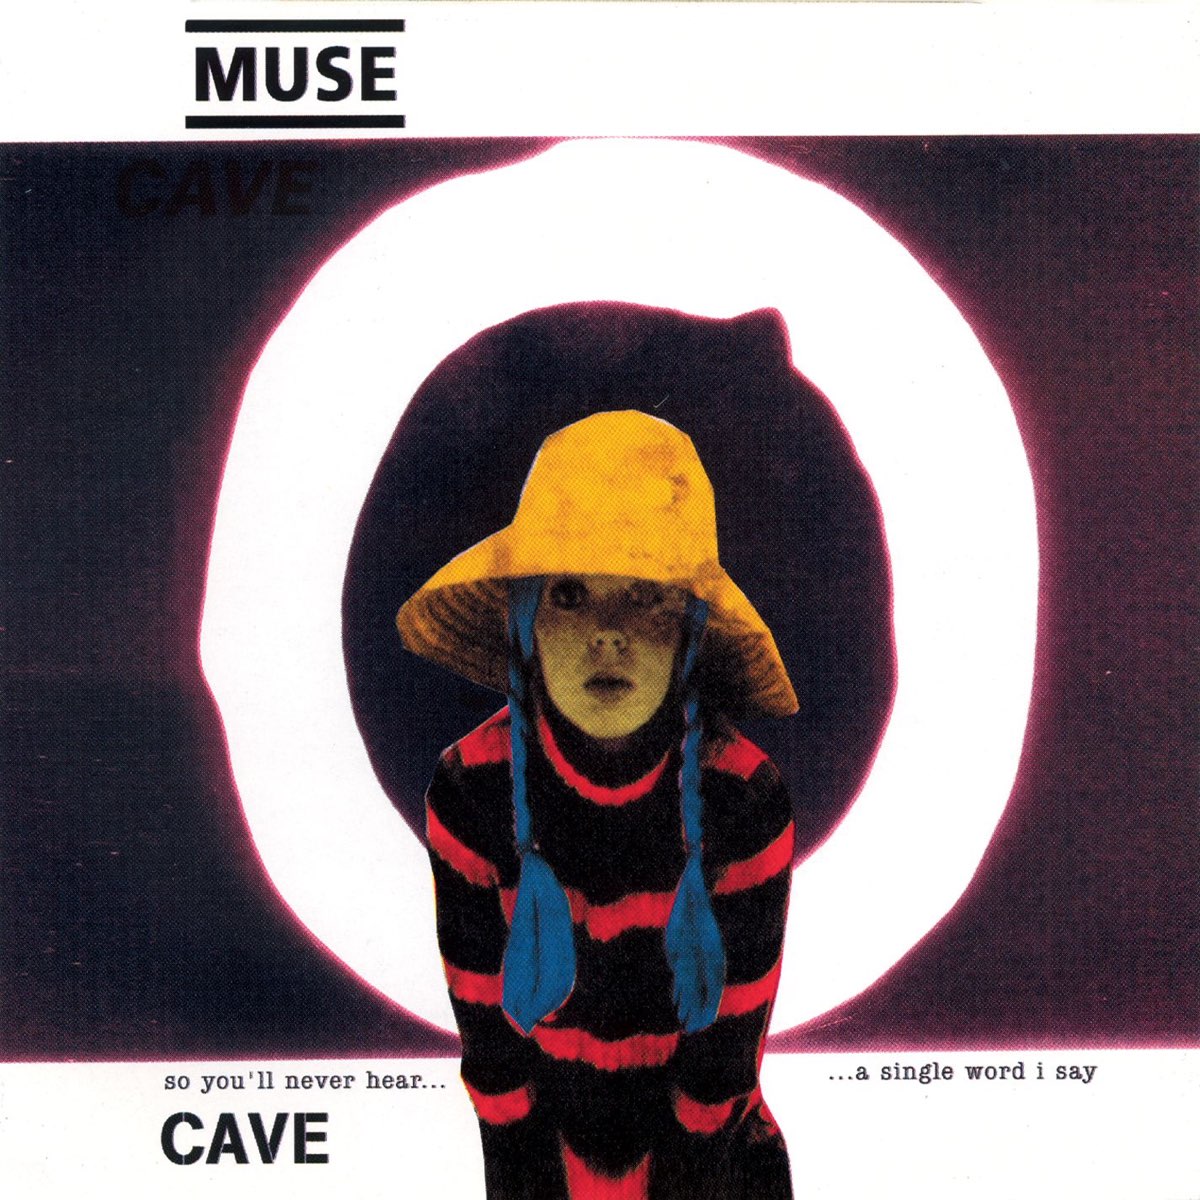 Muse — Twin cover artwork